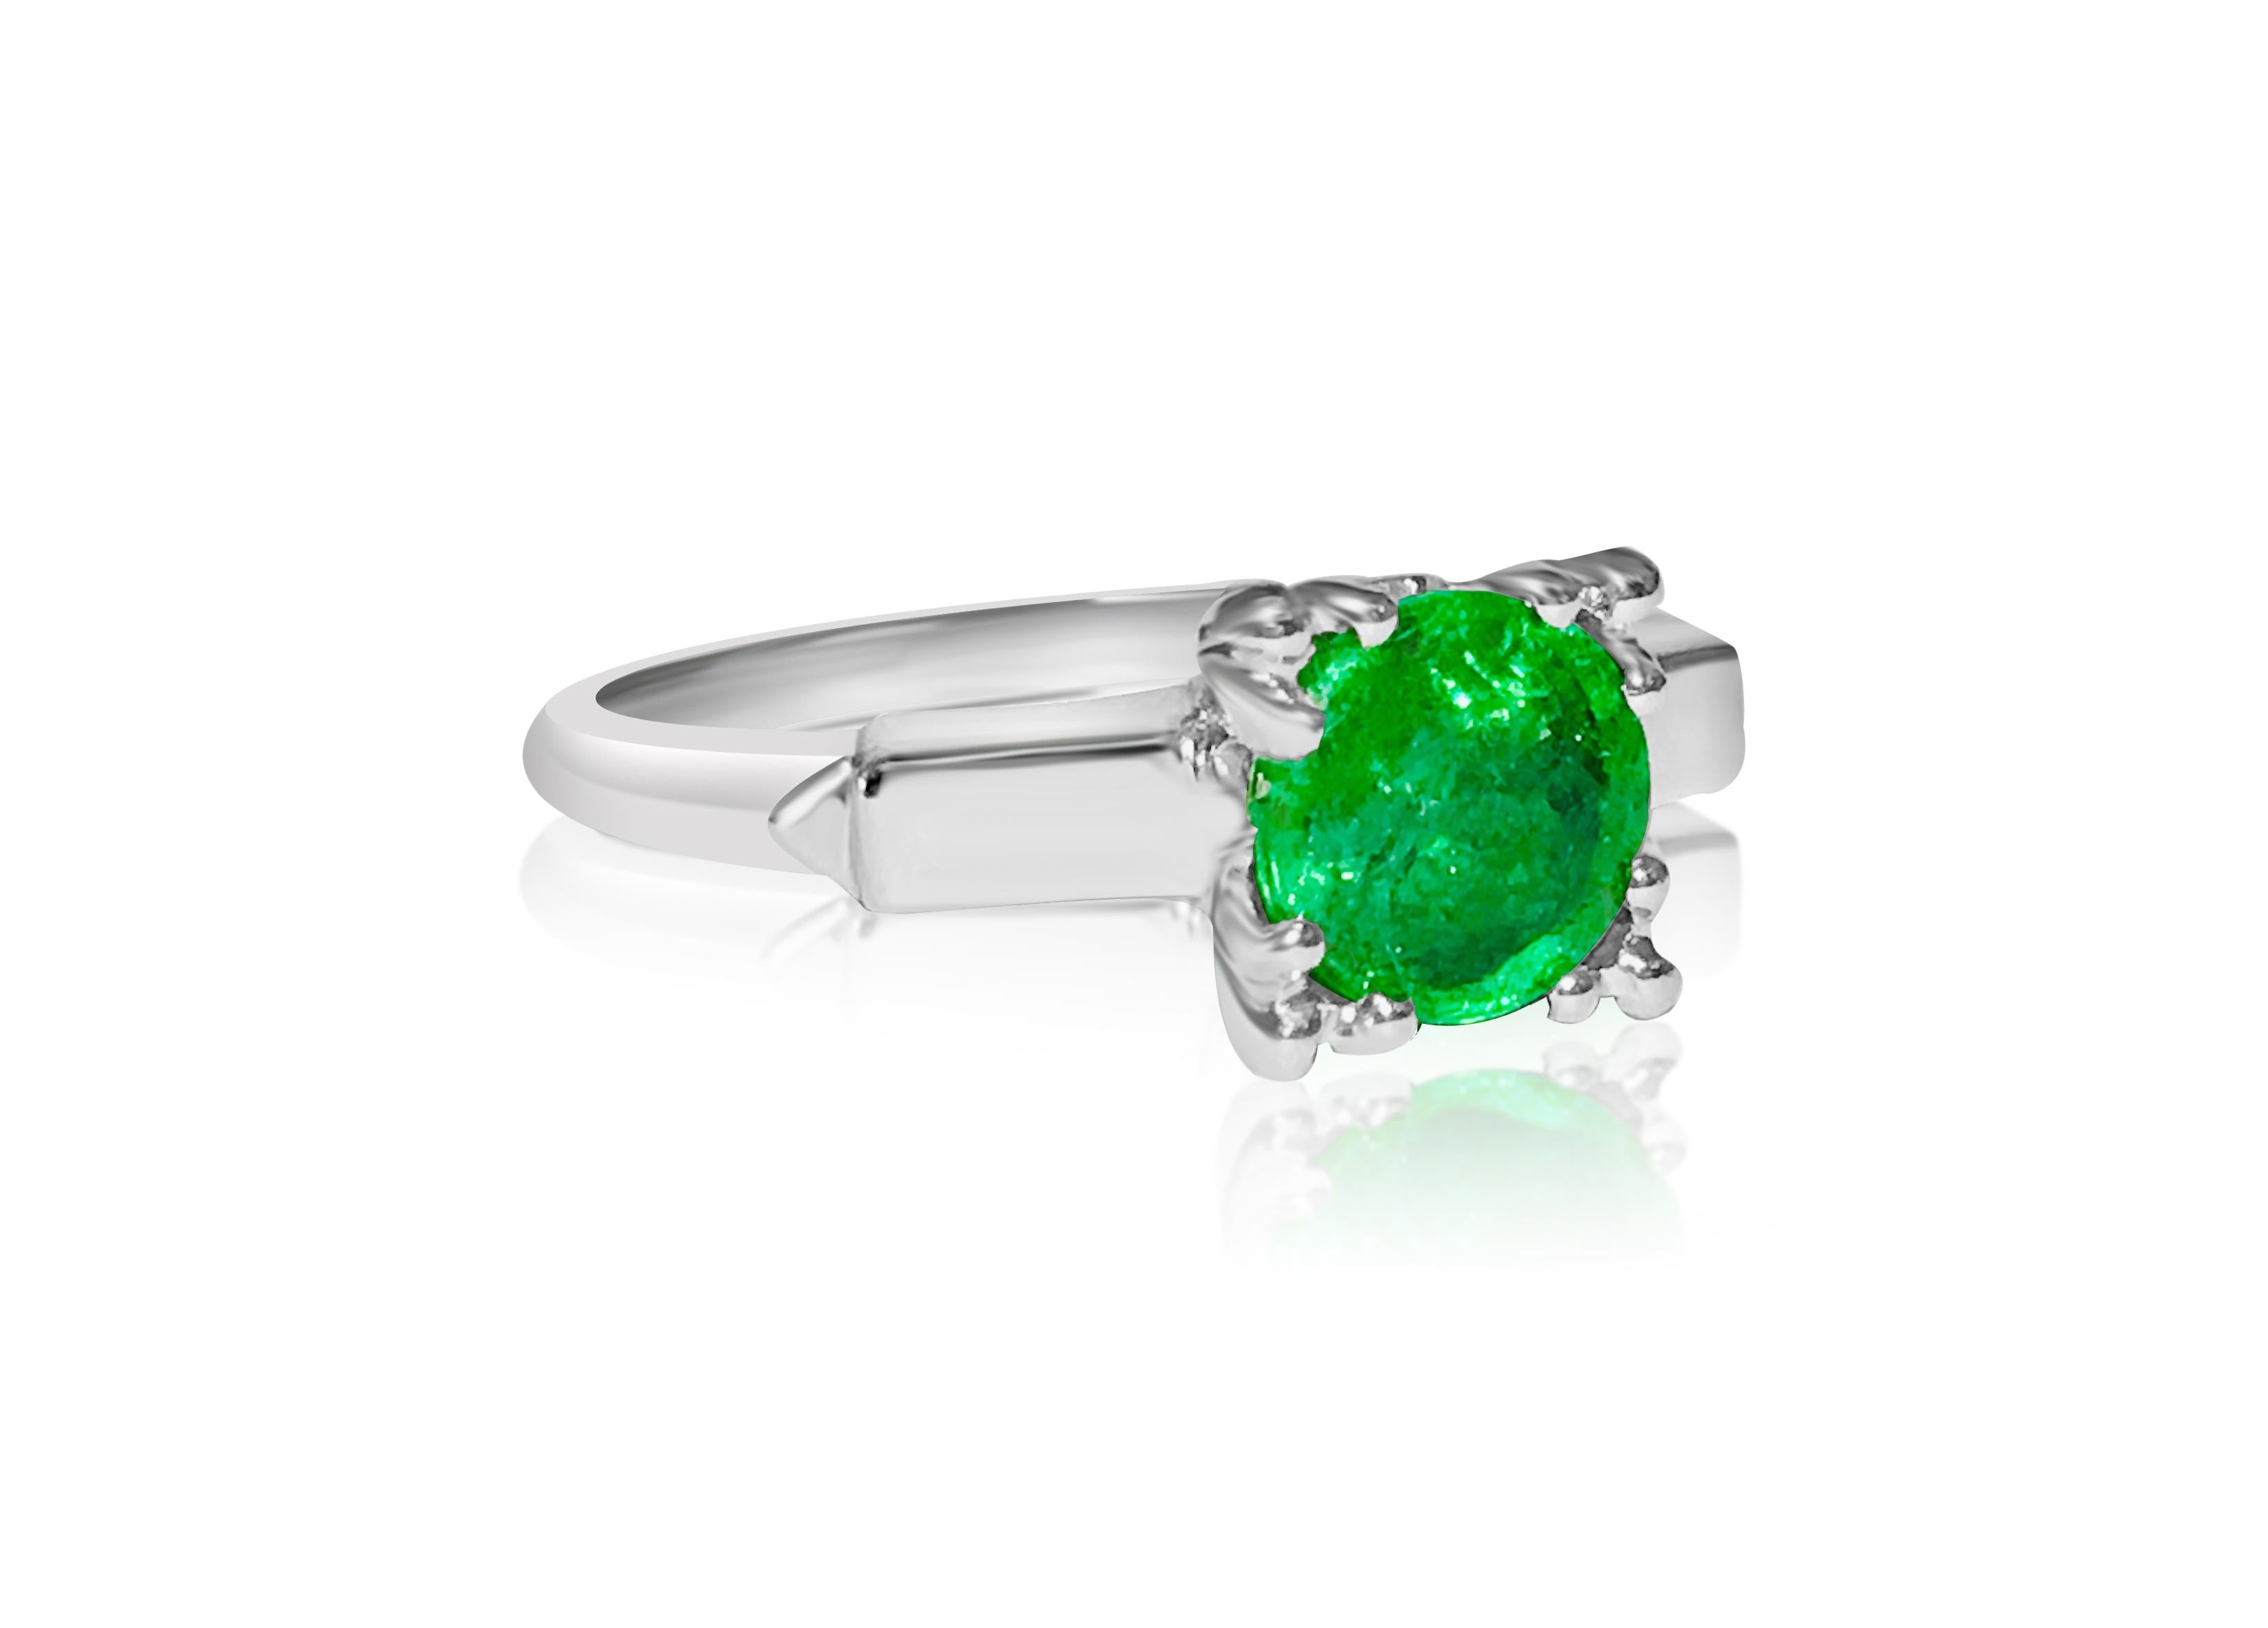 Metal: Platinum 

2.00 carat emerald. Round cut set in prongs. 100% natural earth mined emerald. 

Ring size: US 6.25. Free ring resizing available 

Beautiful emerald and platinum ring. Vintage style engagement ring. 

Certified by GIA graduate